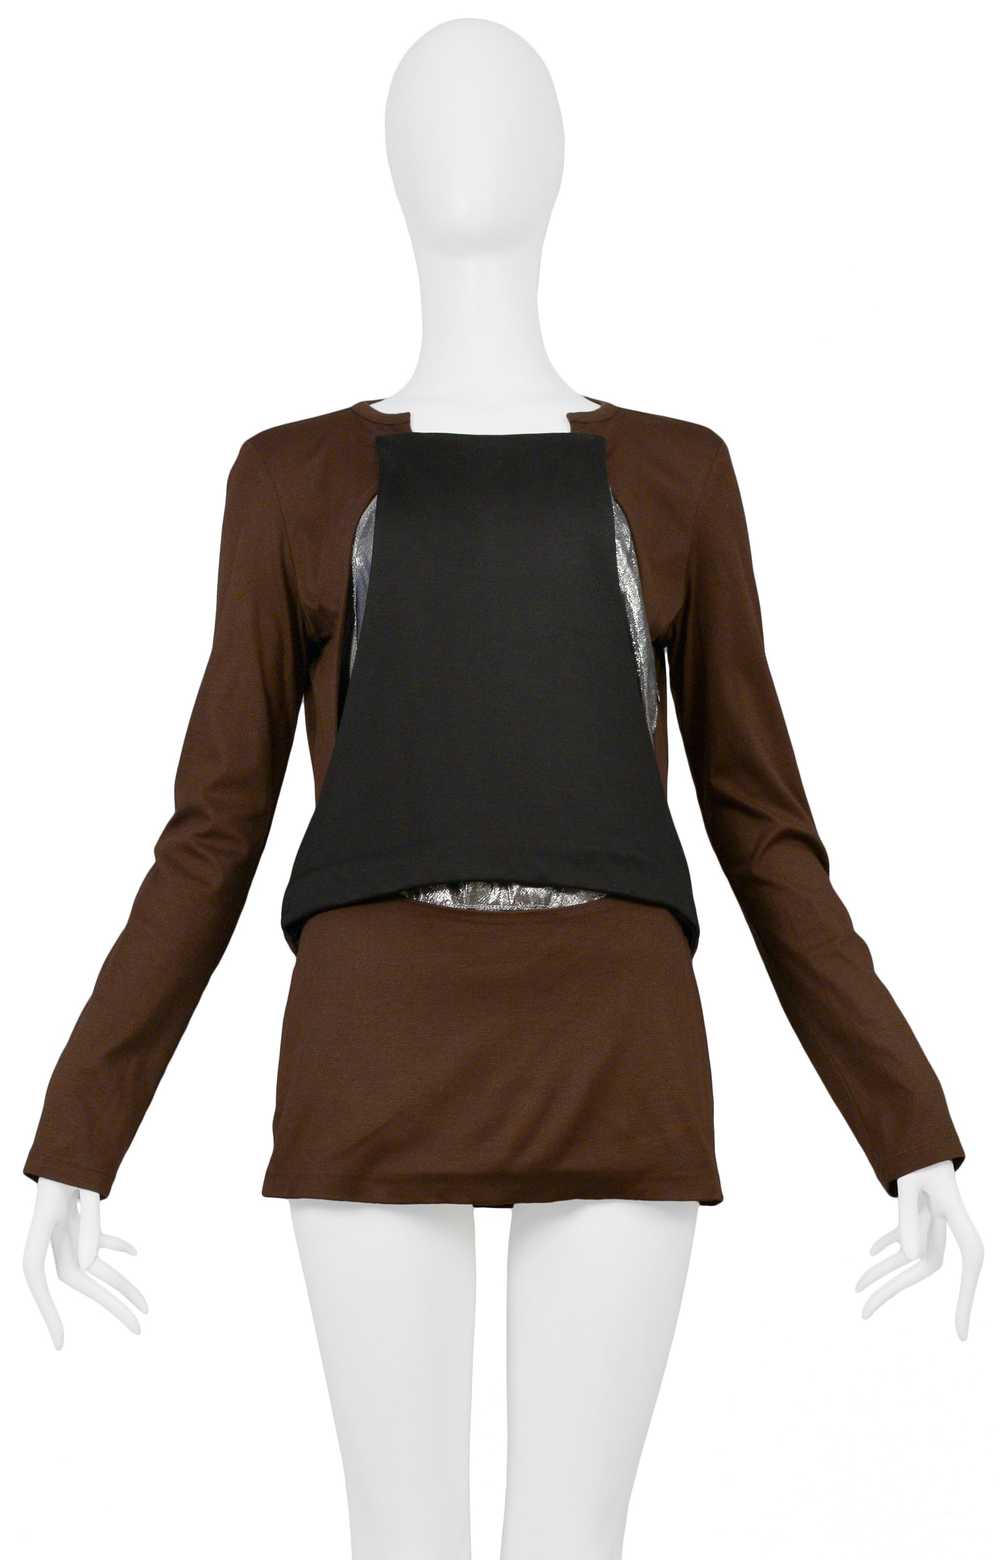 HELMUT LANG BROWN BLACK & SILVER INSET TUNIC - image 1